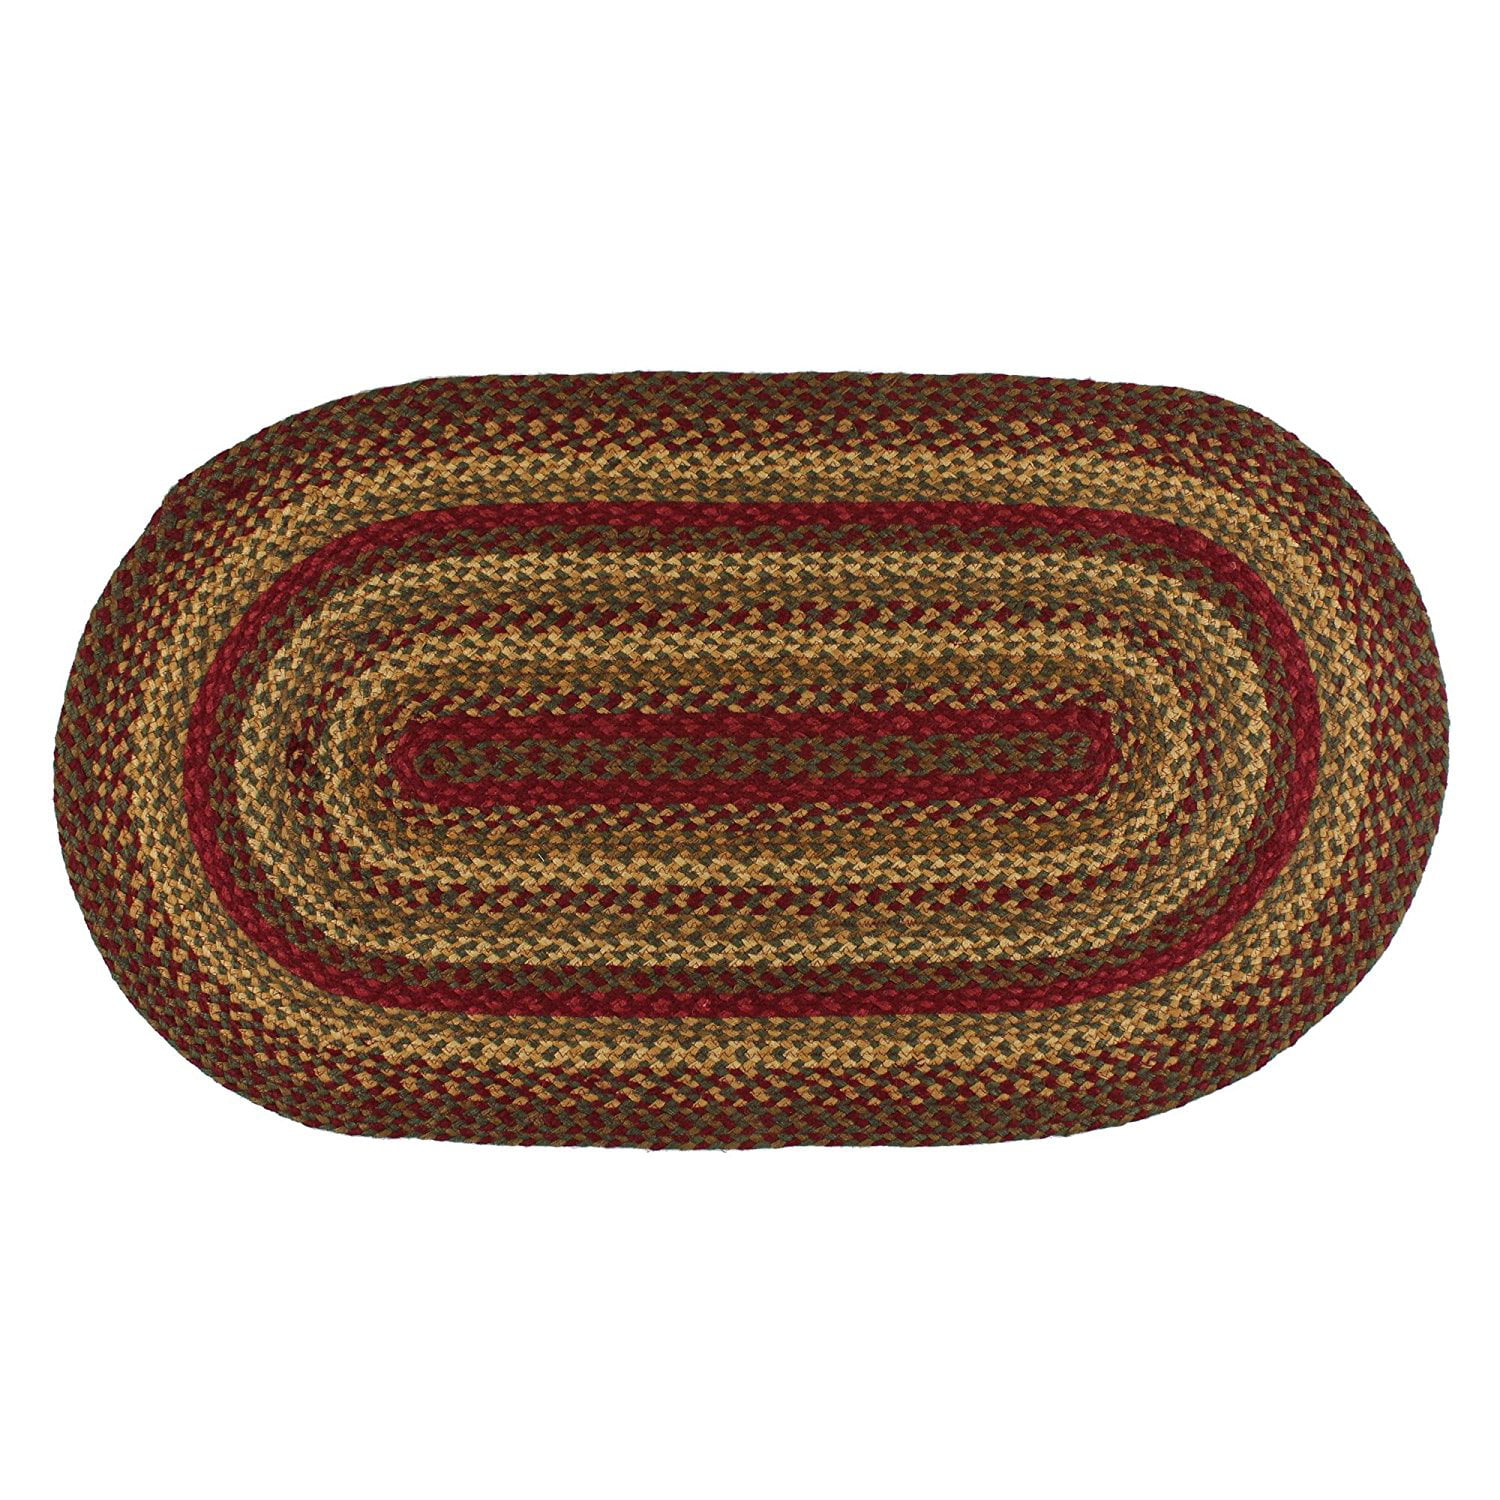 48 Oval Area Floor Carpet Braided Rug, Country Style Kitchen Throw Rugs